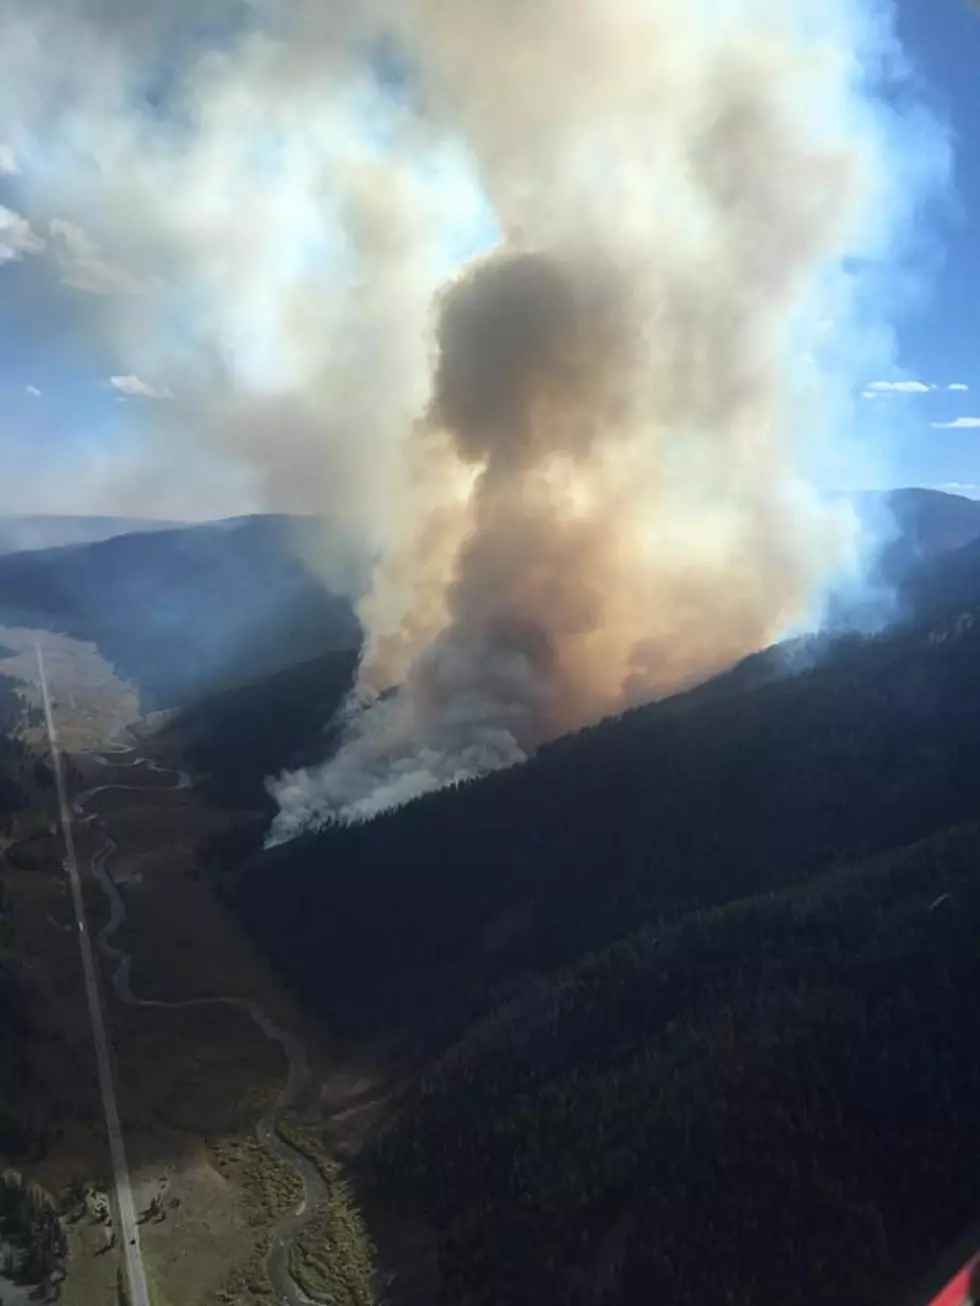 Growing Concern as Fire in Yellowstone Spreads